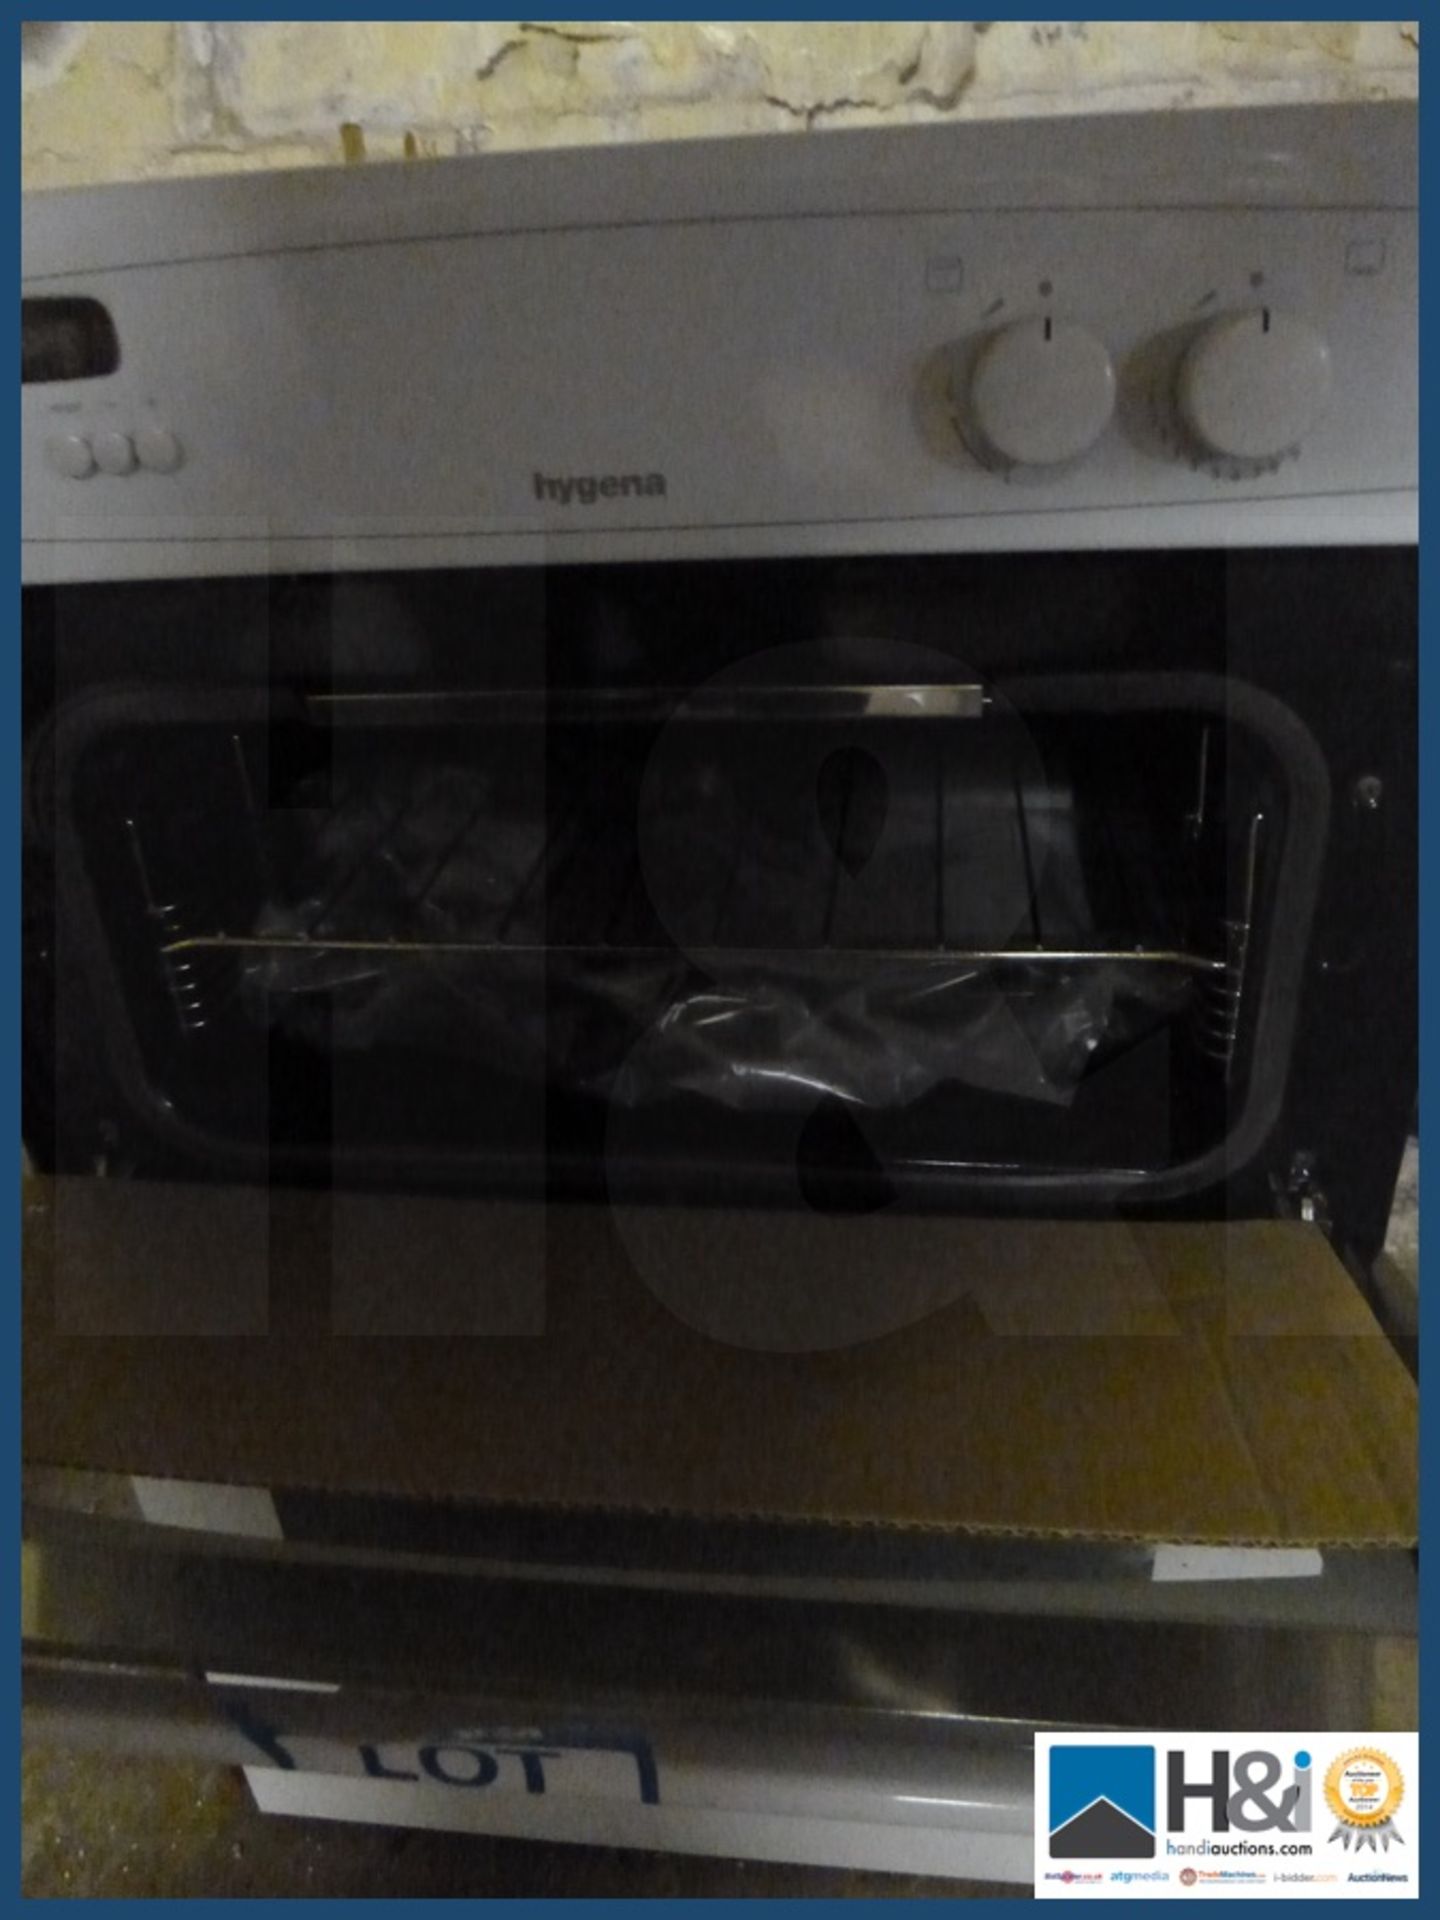 Hygena integrated double gas oven appears unused untested. - Image 2 of 3